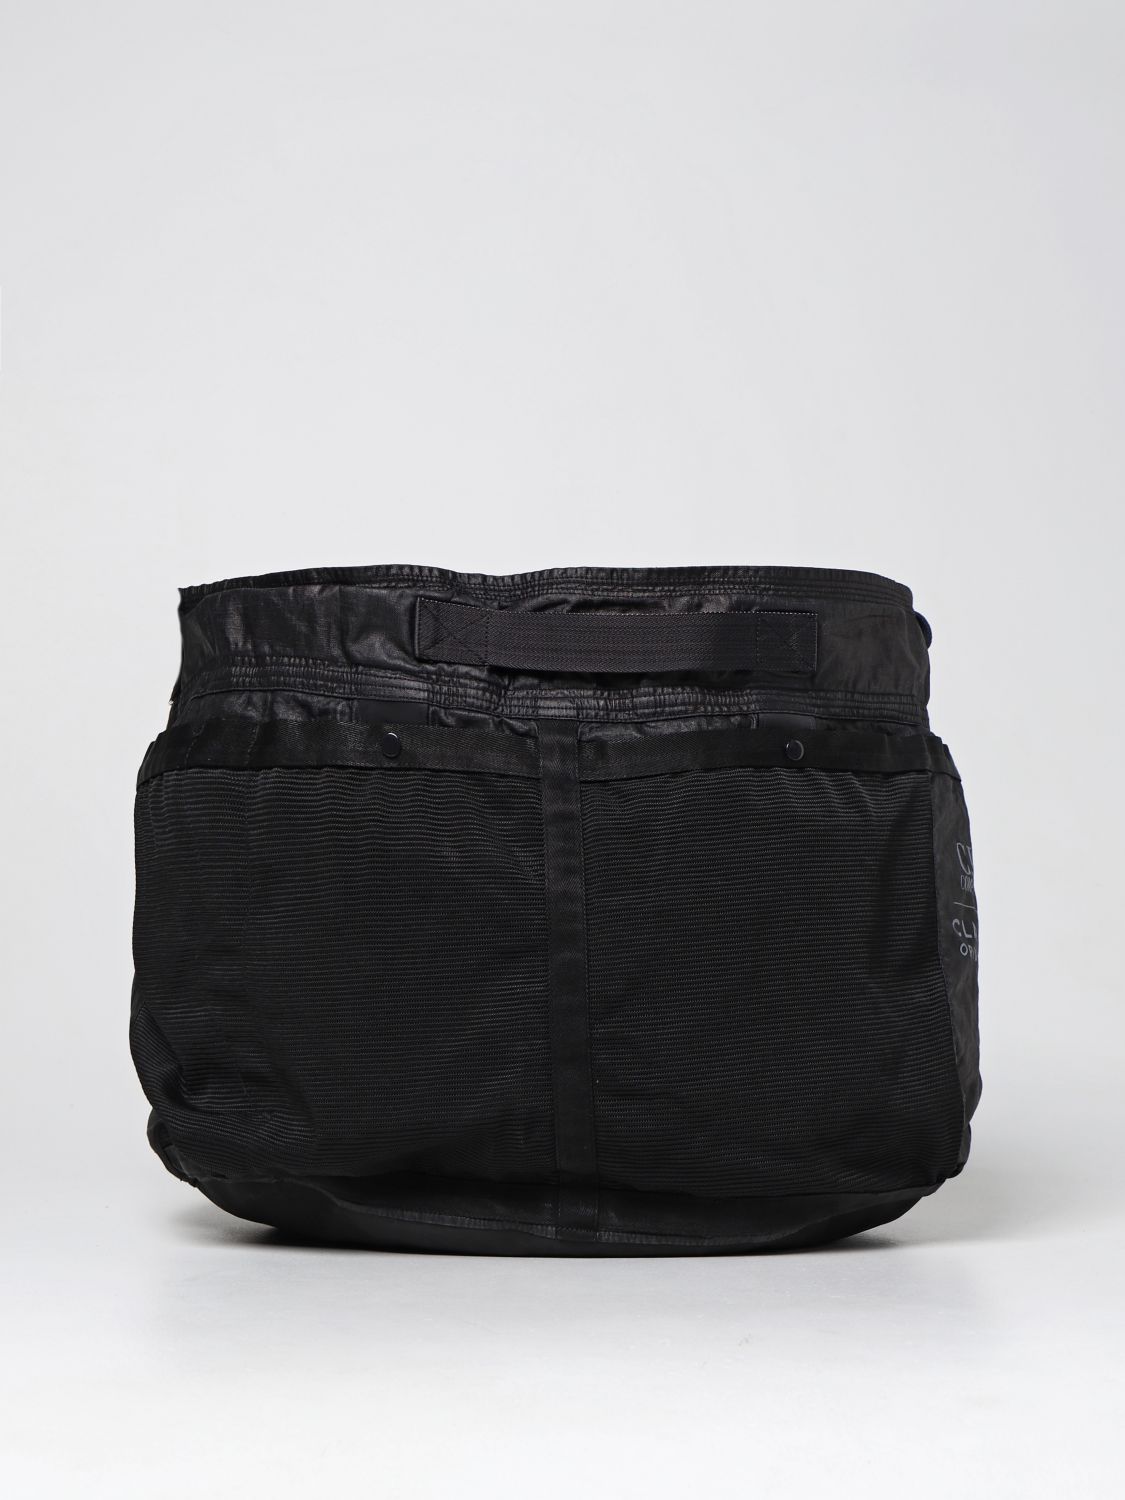 CLARKS C.P. COMPANY: crossbody linen wax - Black | Clarks X C.p. Company bags 12CMAC324A006284G online at GIGLIO.COM